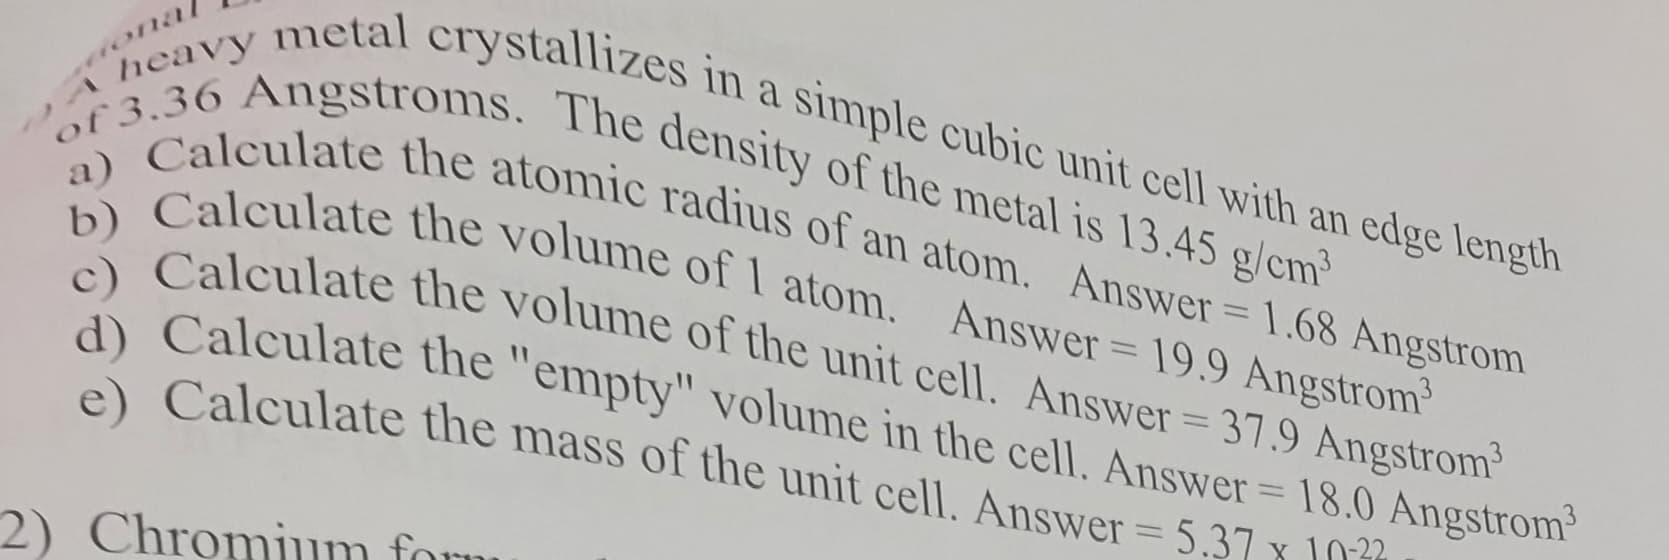 a)
nal
A heavy metal crystallizes in a simple cubic unit cell with an edge length
of 3.36 Angstroms. The density of the metal is 13.45 g/cm³
Calculate the atomic radius of an atom. Answer = 1.68 Angstrom
b) Calculate the volume of 1 atom. Answer = 19.9 Angstrom³
c) Calculate the volume of the unit cell. Answer=37.9 Angstrom³
d) Calculate the "empty" volume in the cell. Answer = 18.0 Angstrom³
e) Calculate the mass of the unit cell. Answer = 5.37 x 10
2) Chromium form